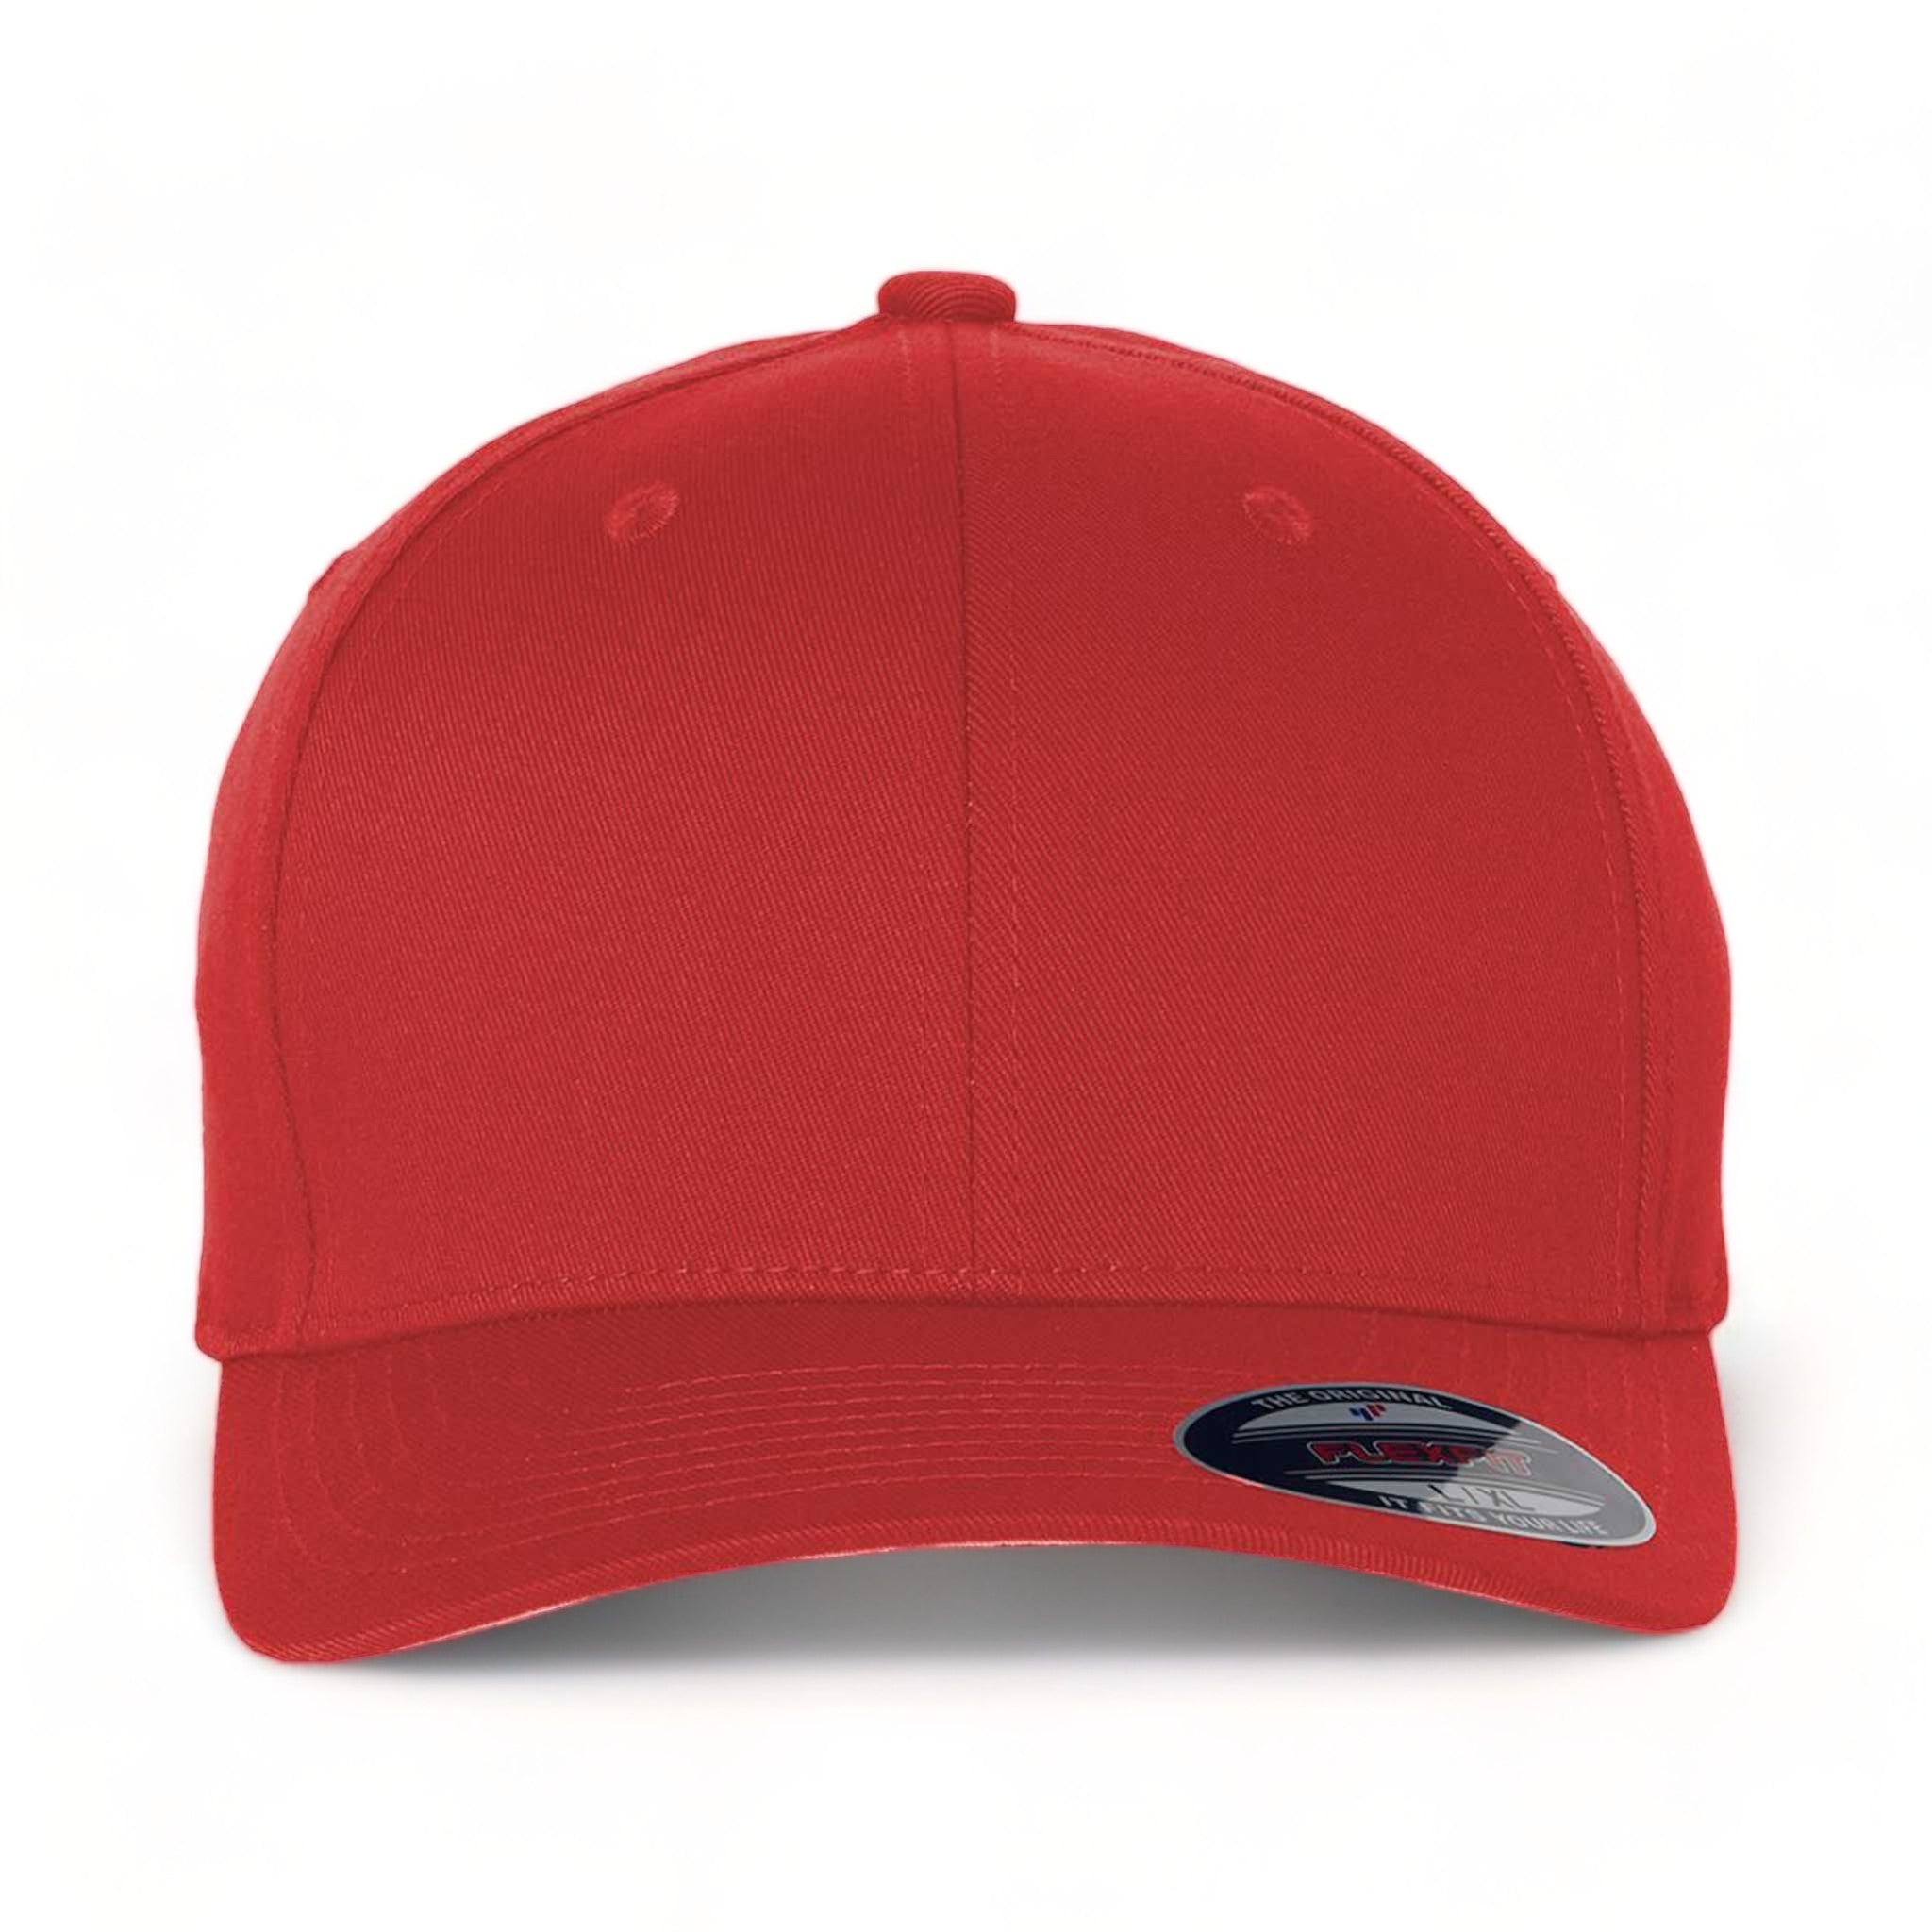 Front view of Flexfit 6277 custom hat in red